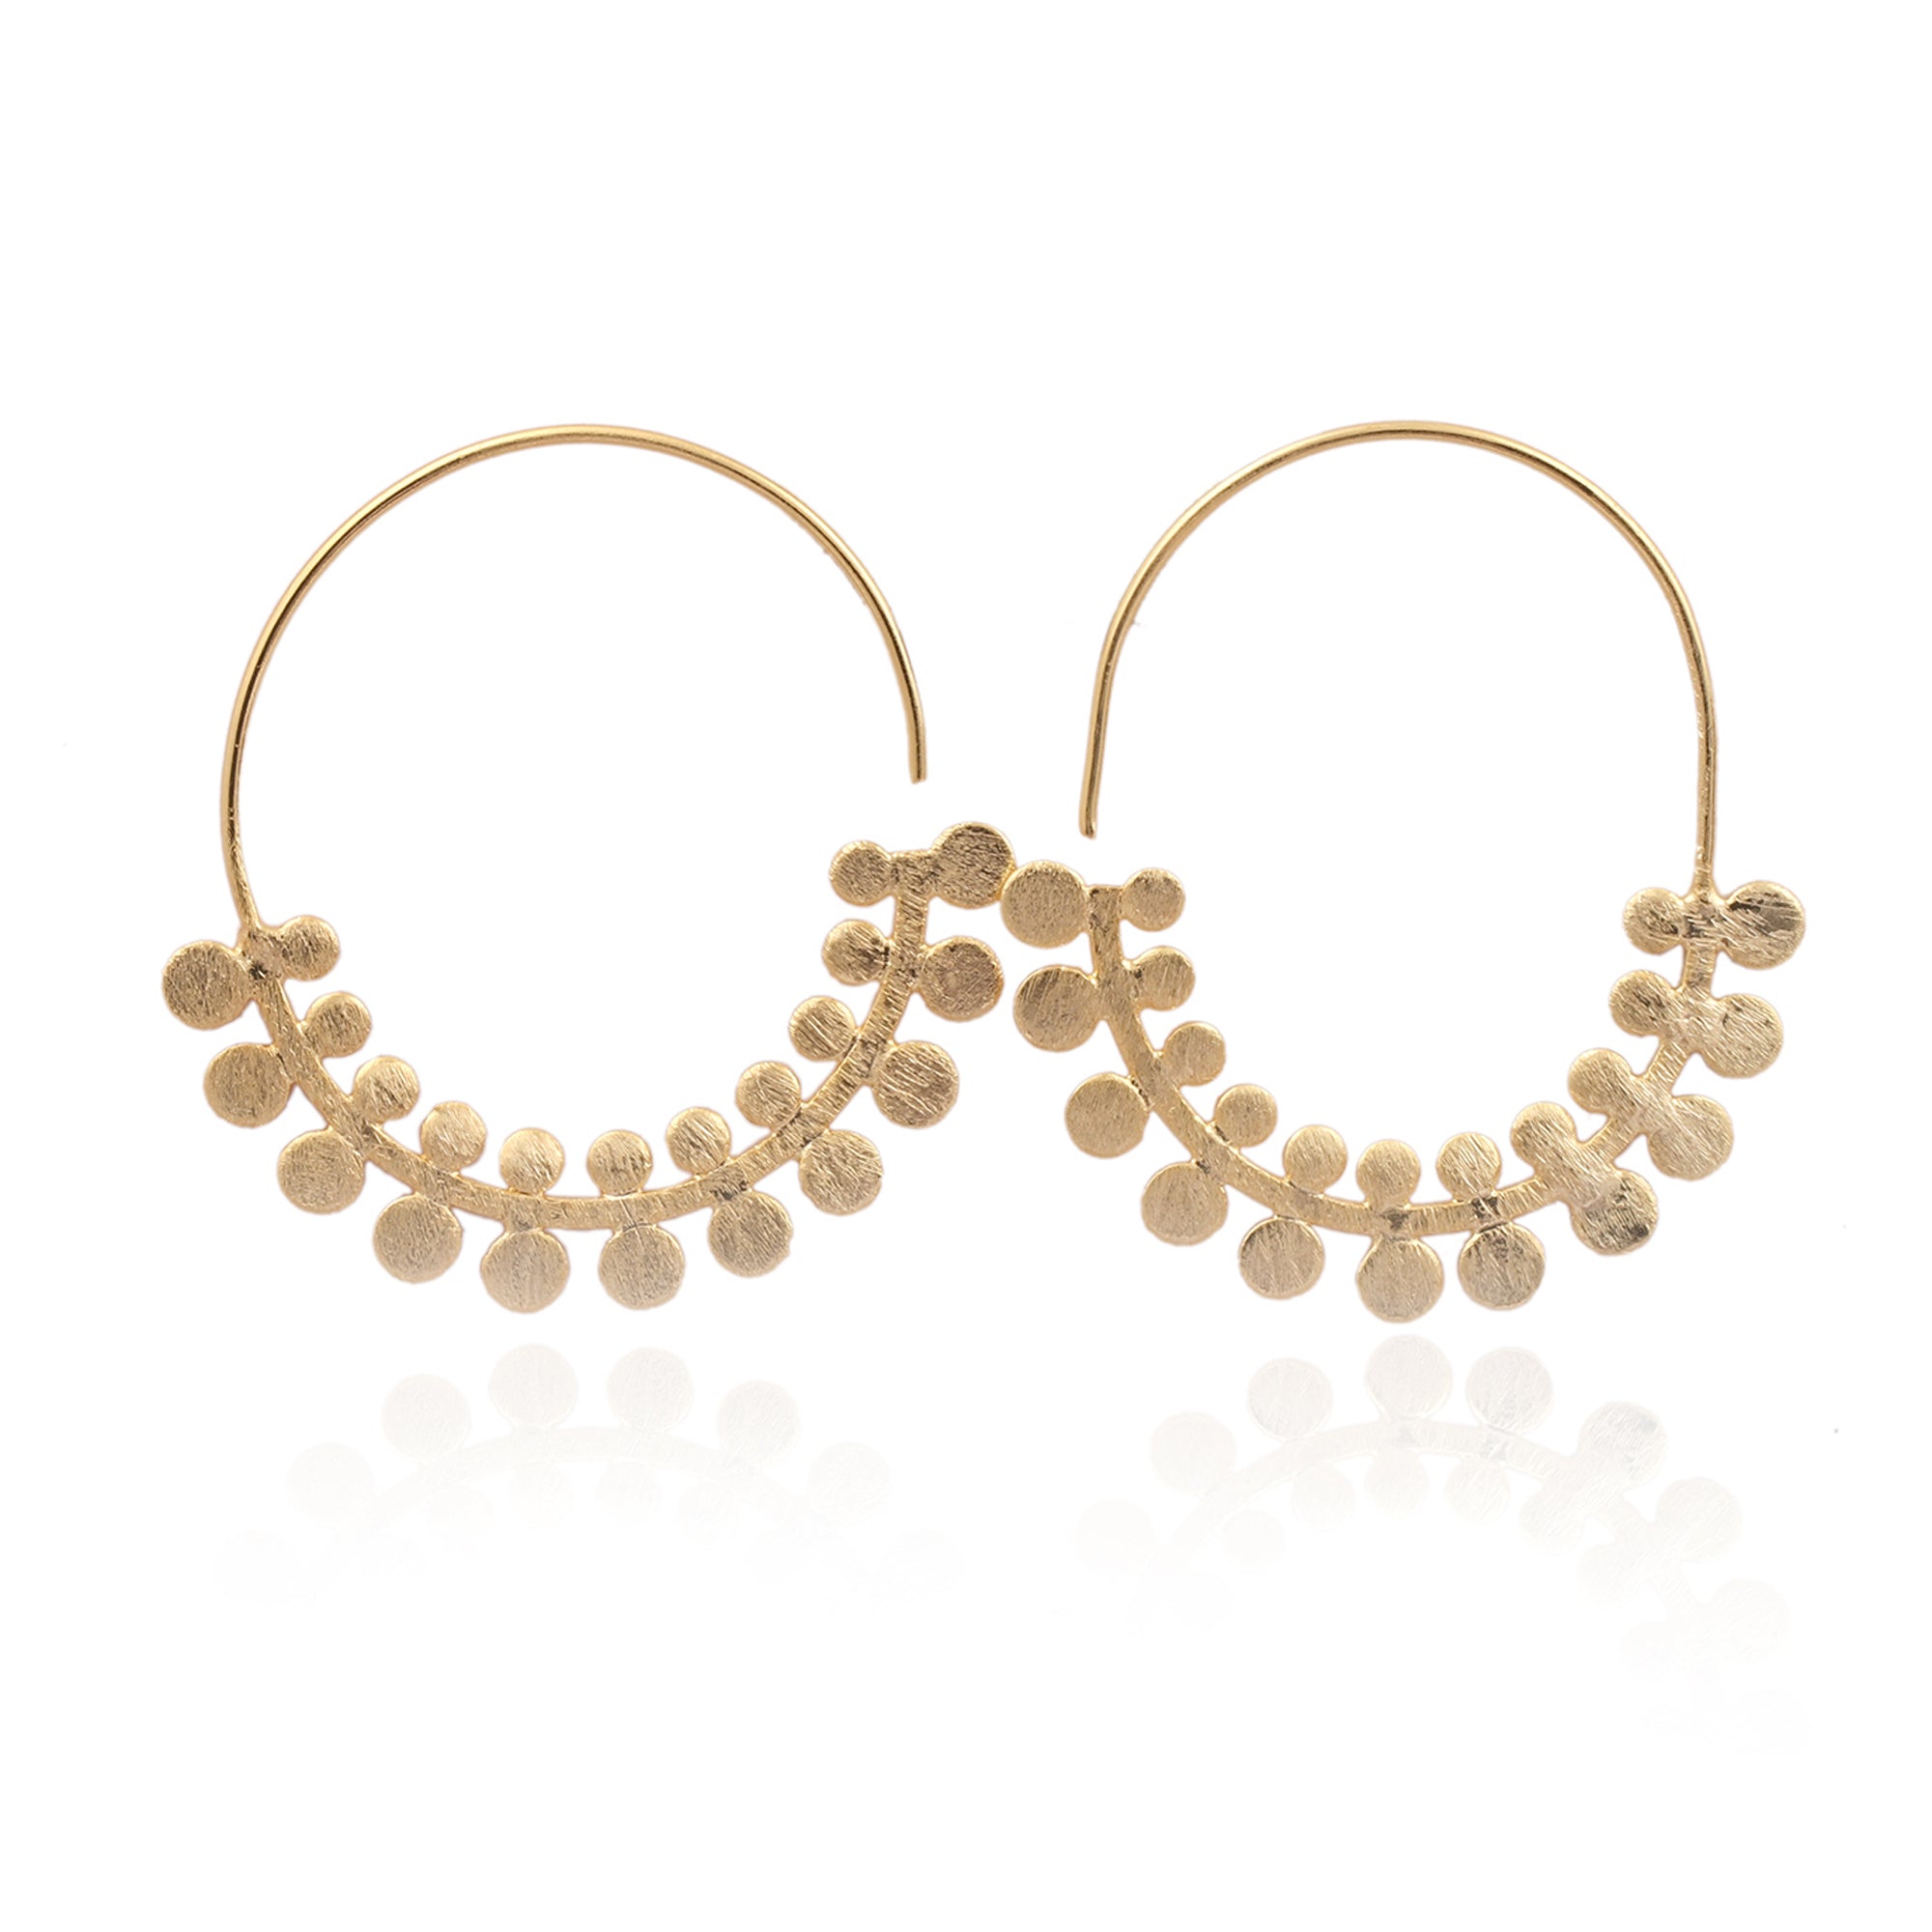 Textured Hoops with Filigree, Gold plated. Handmade